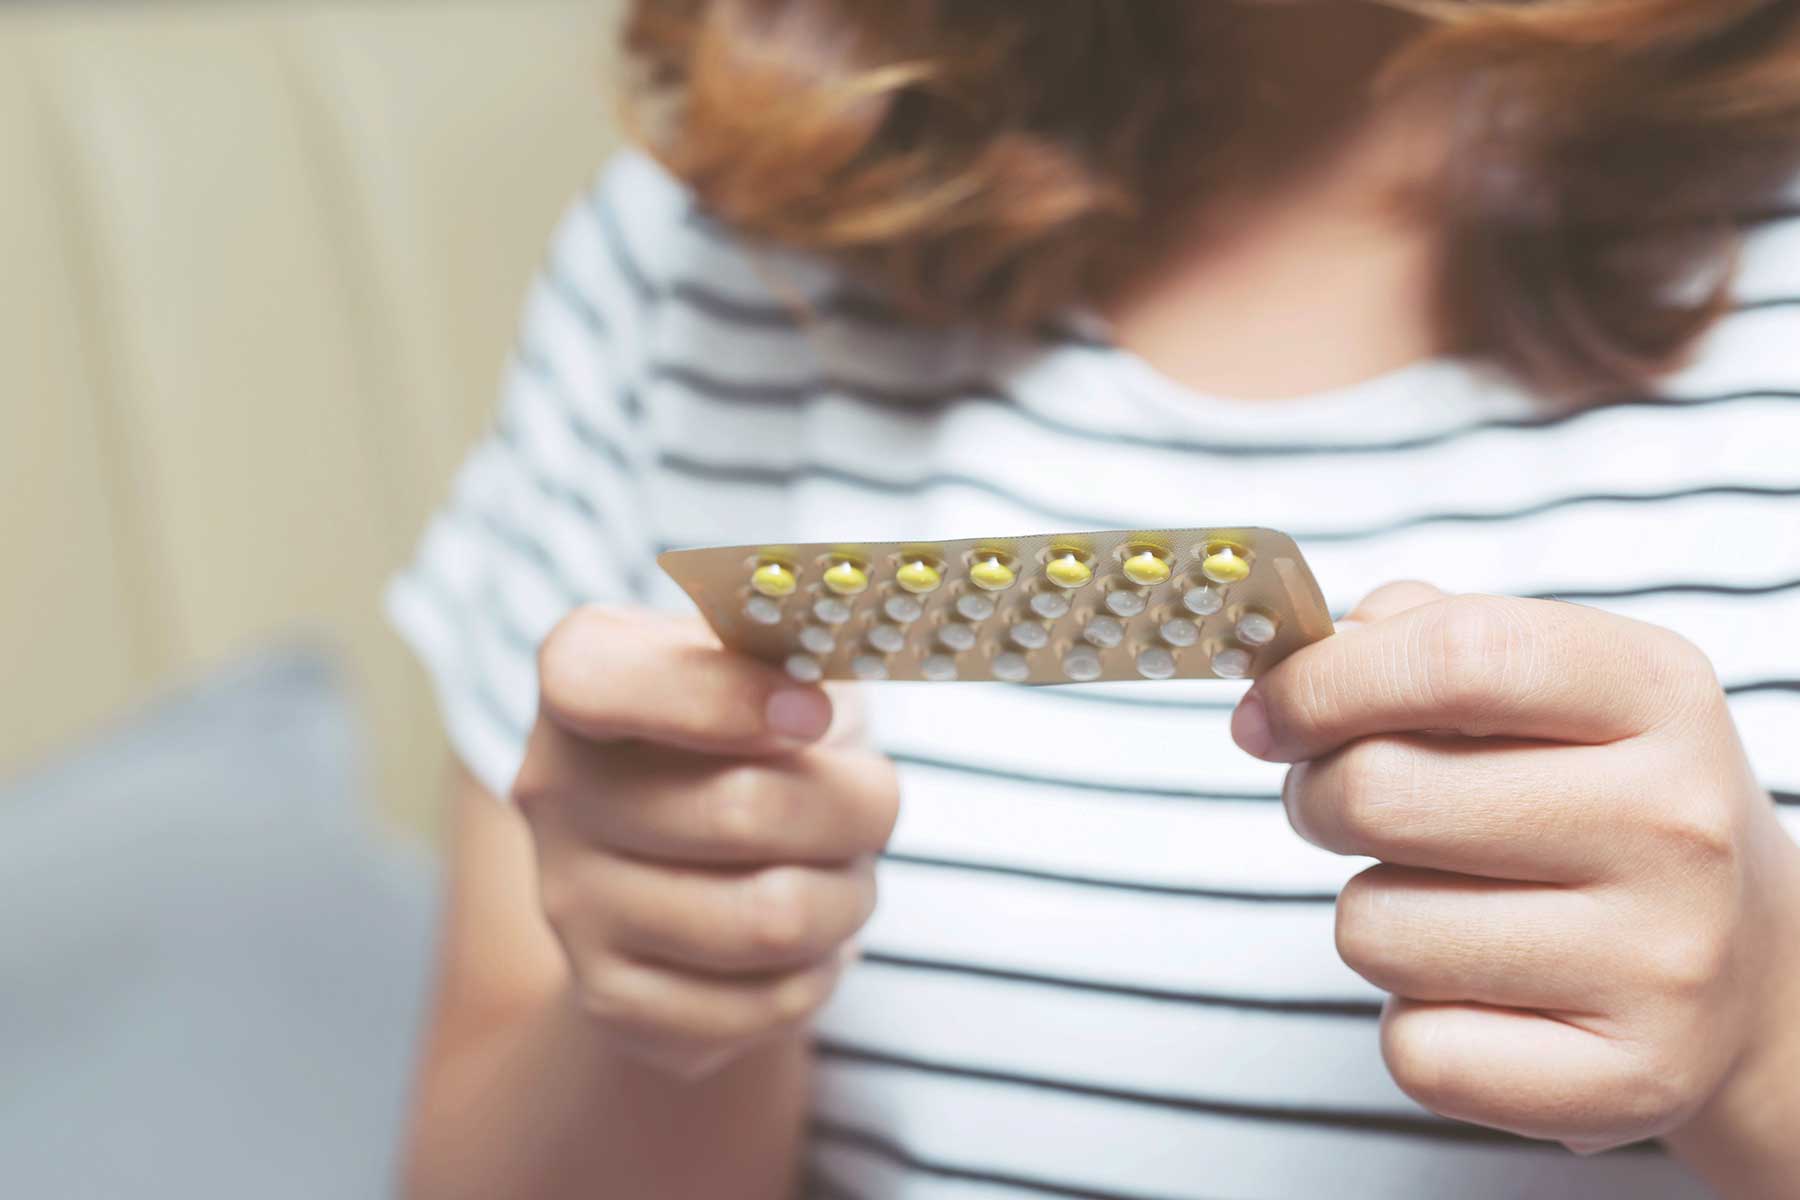 Is Your Birth Control Making You Dry?